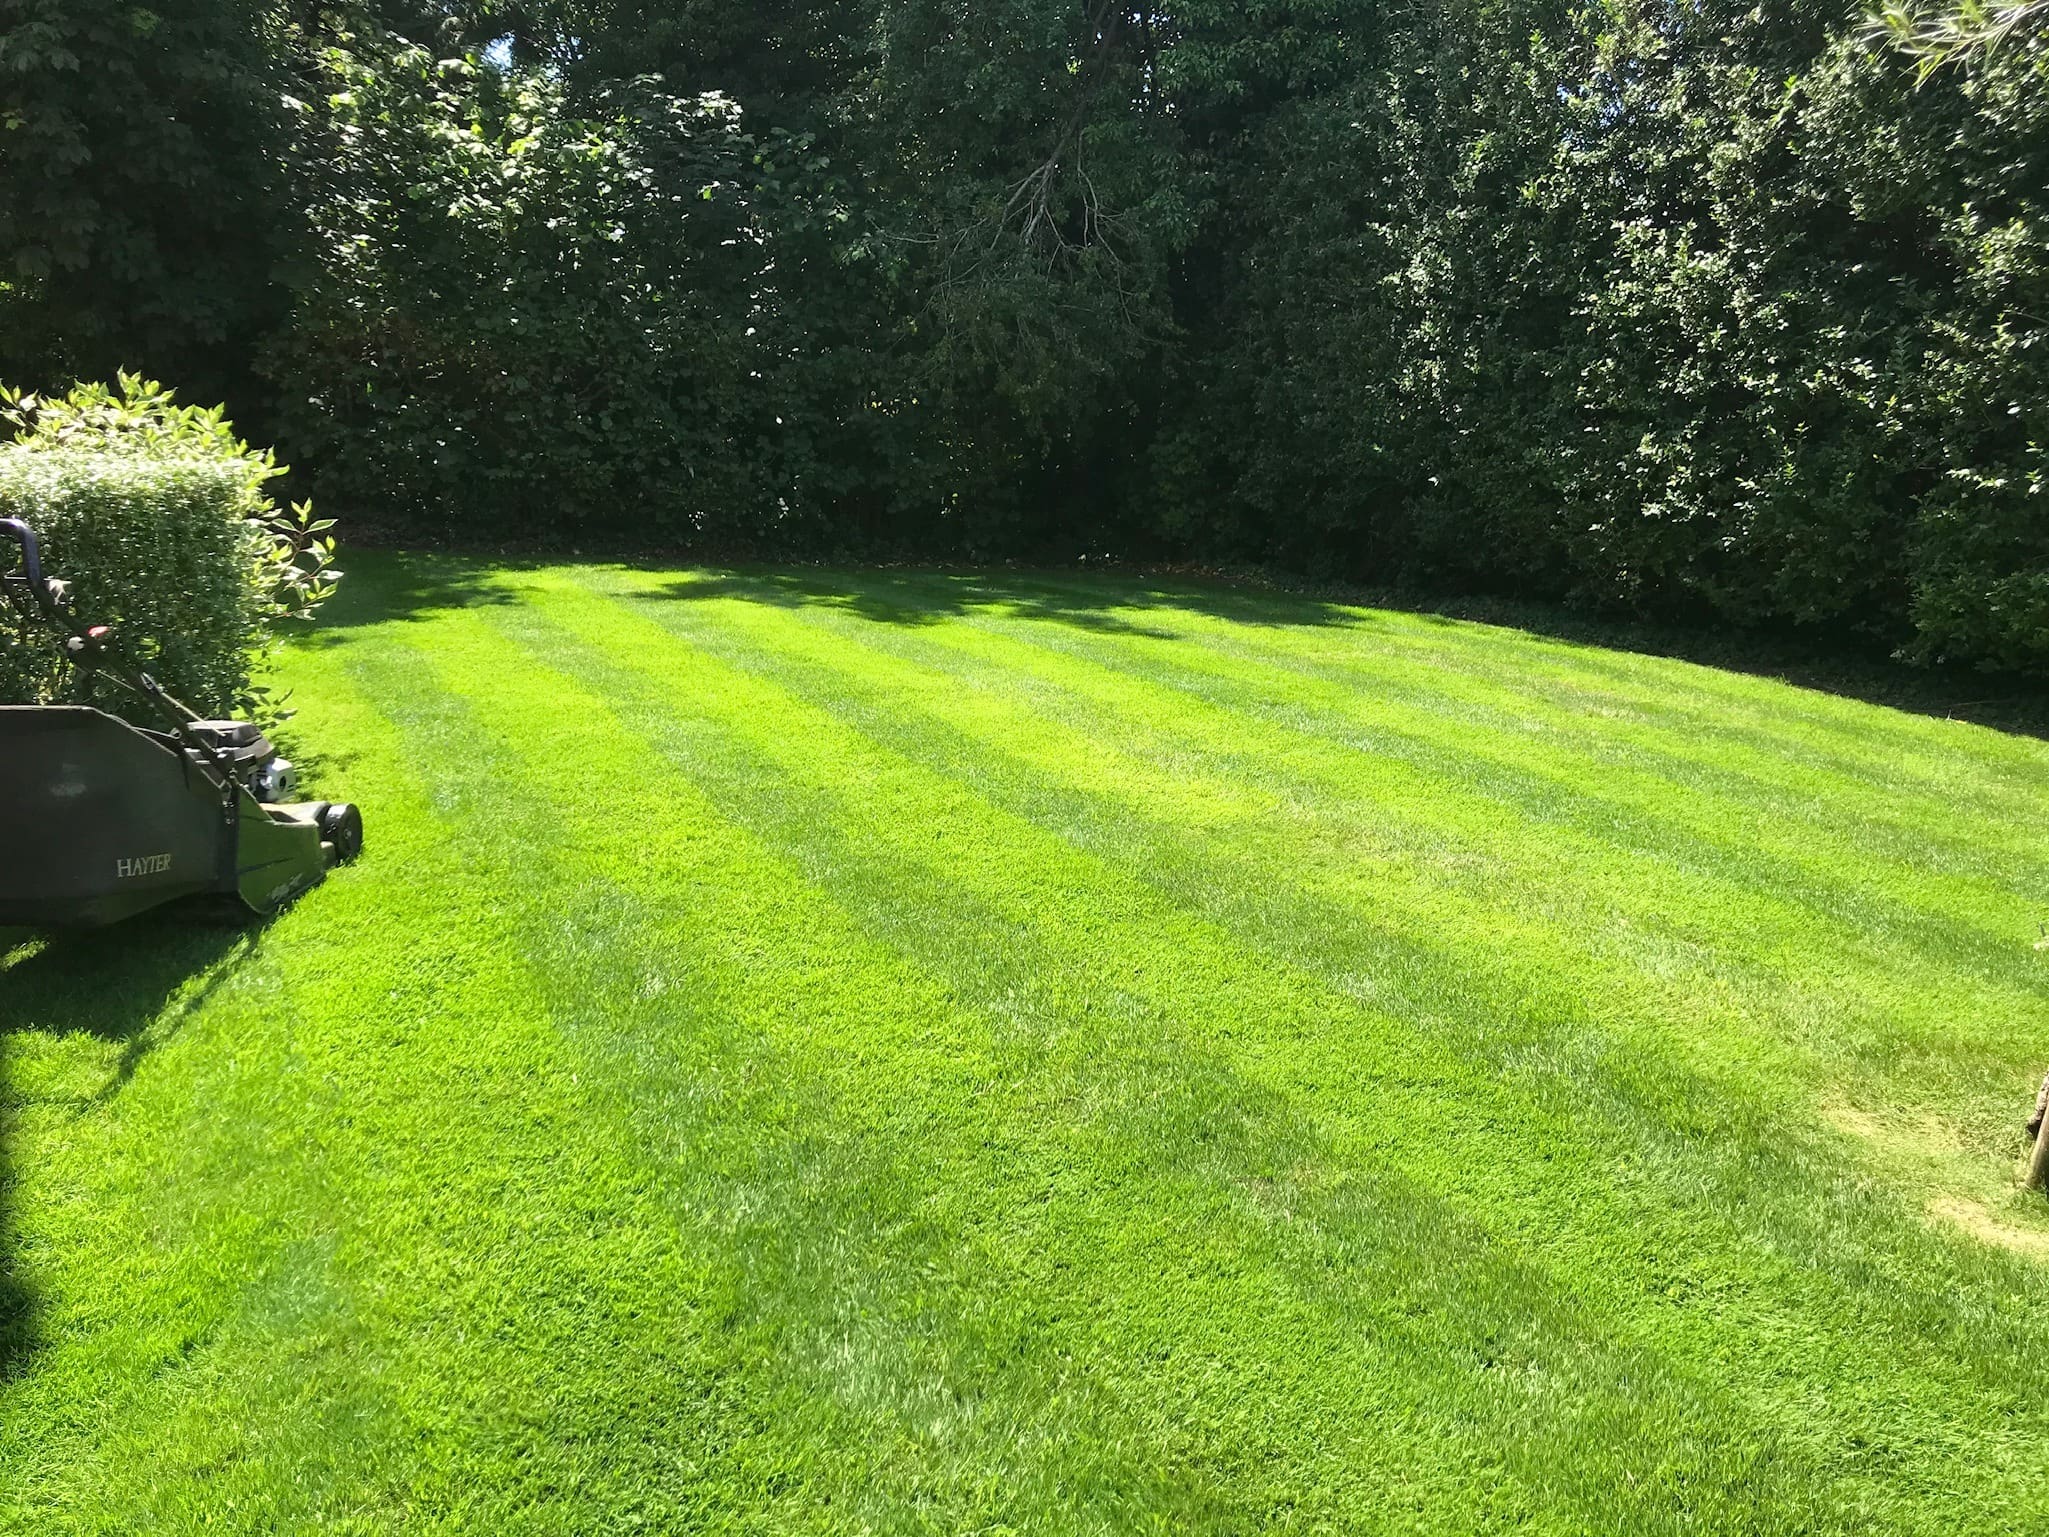 Green lawn with stripes